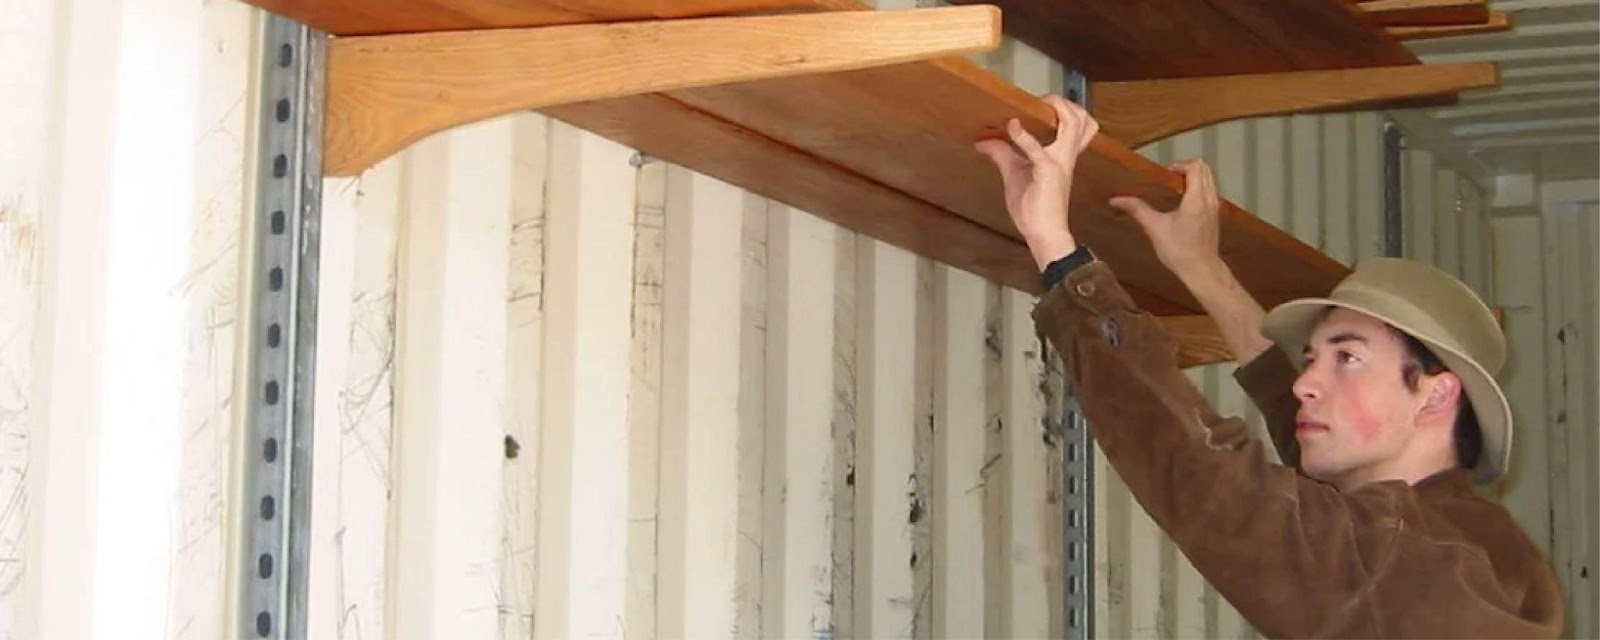 A worker installing shelves in a container